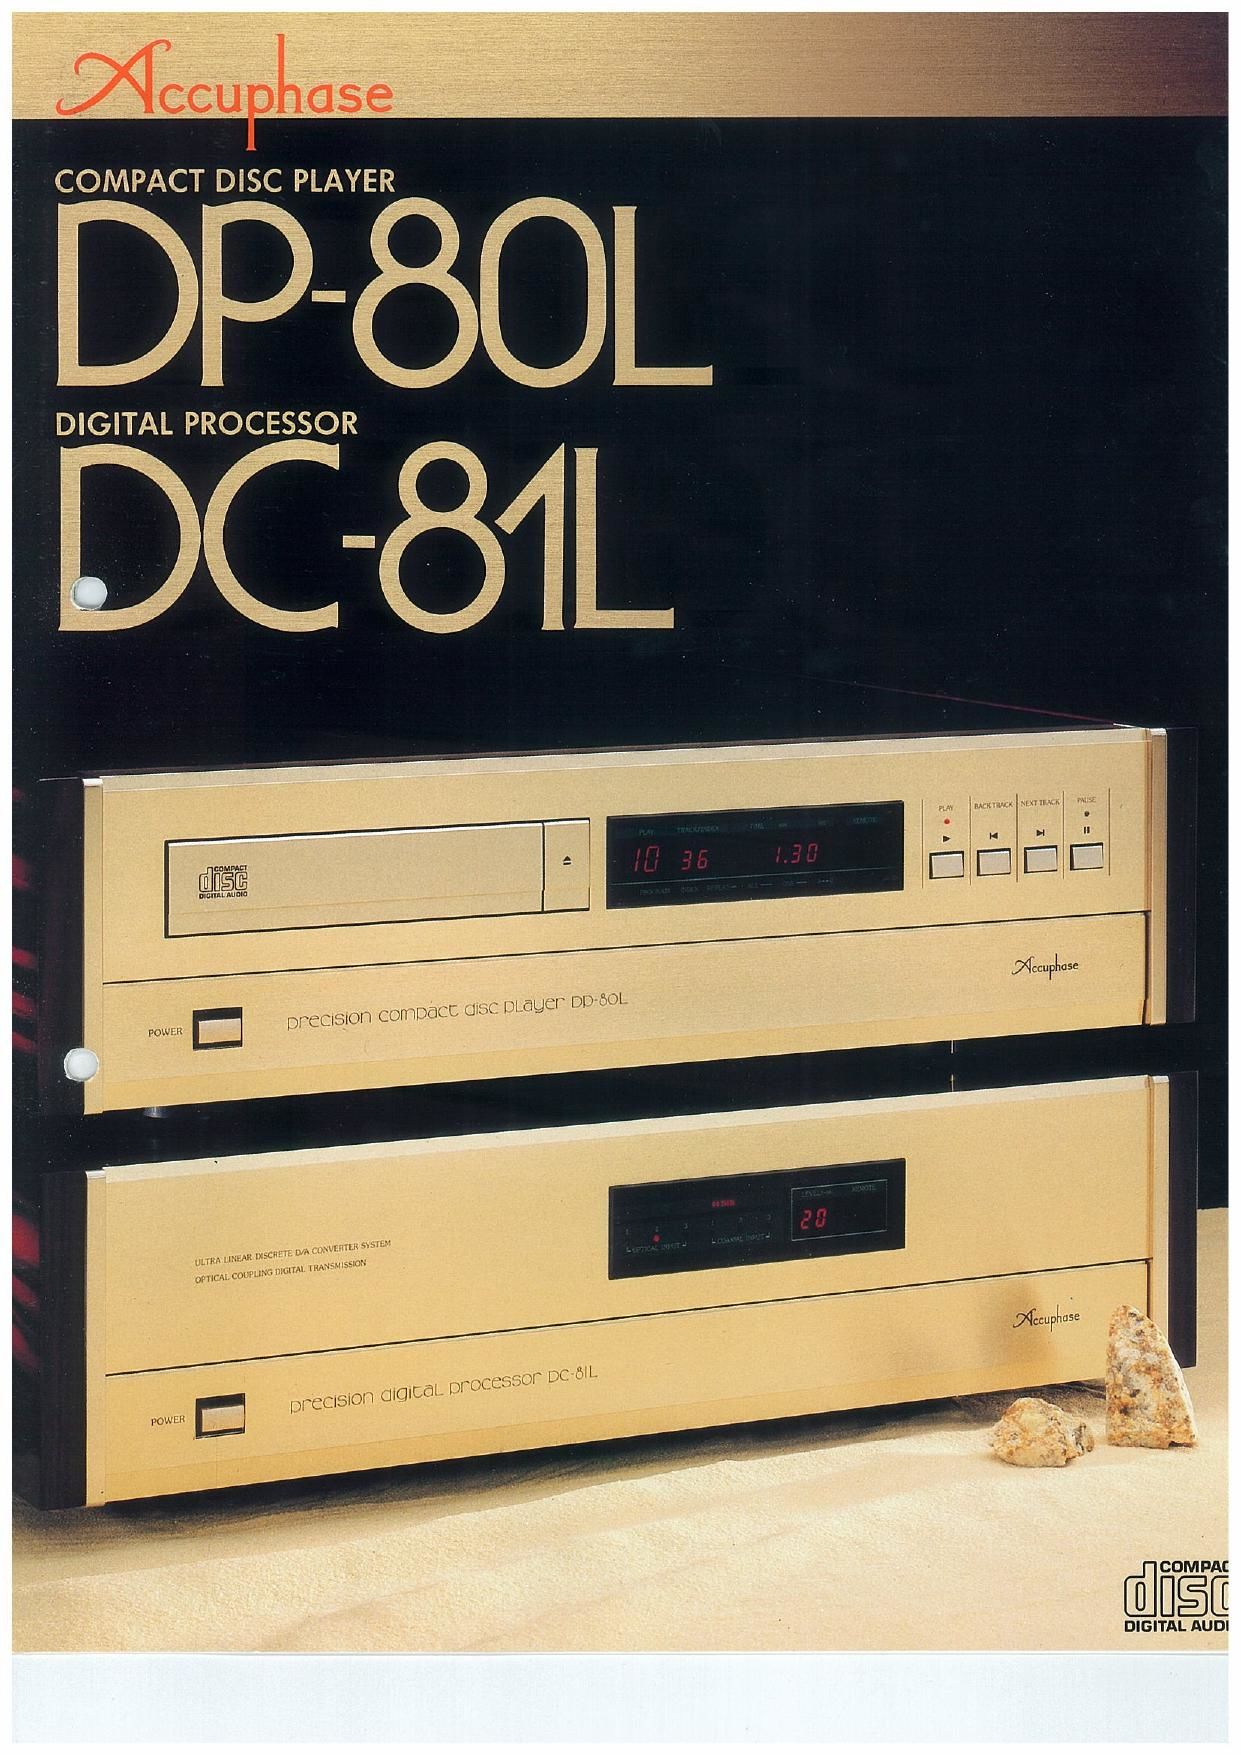 Accuphase DP 80 L Brochure